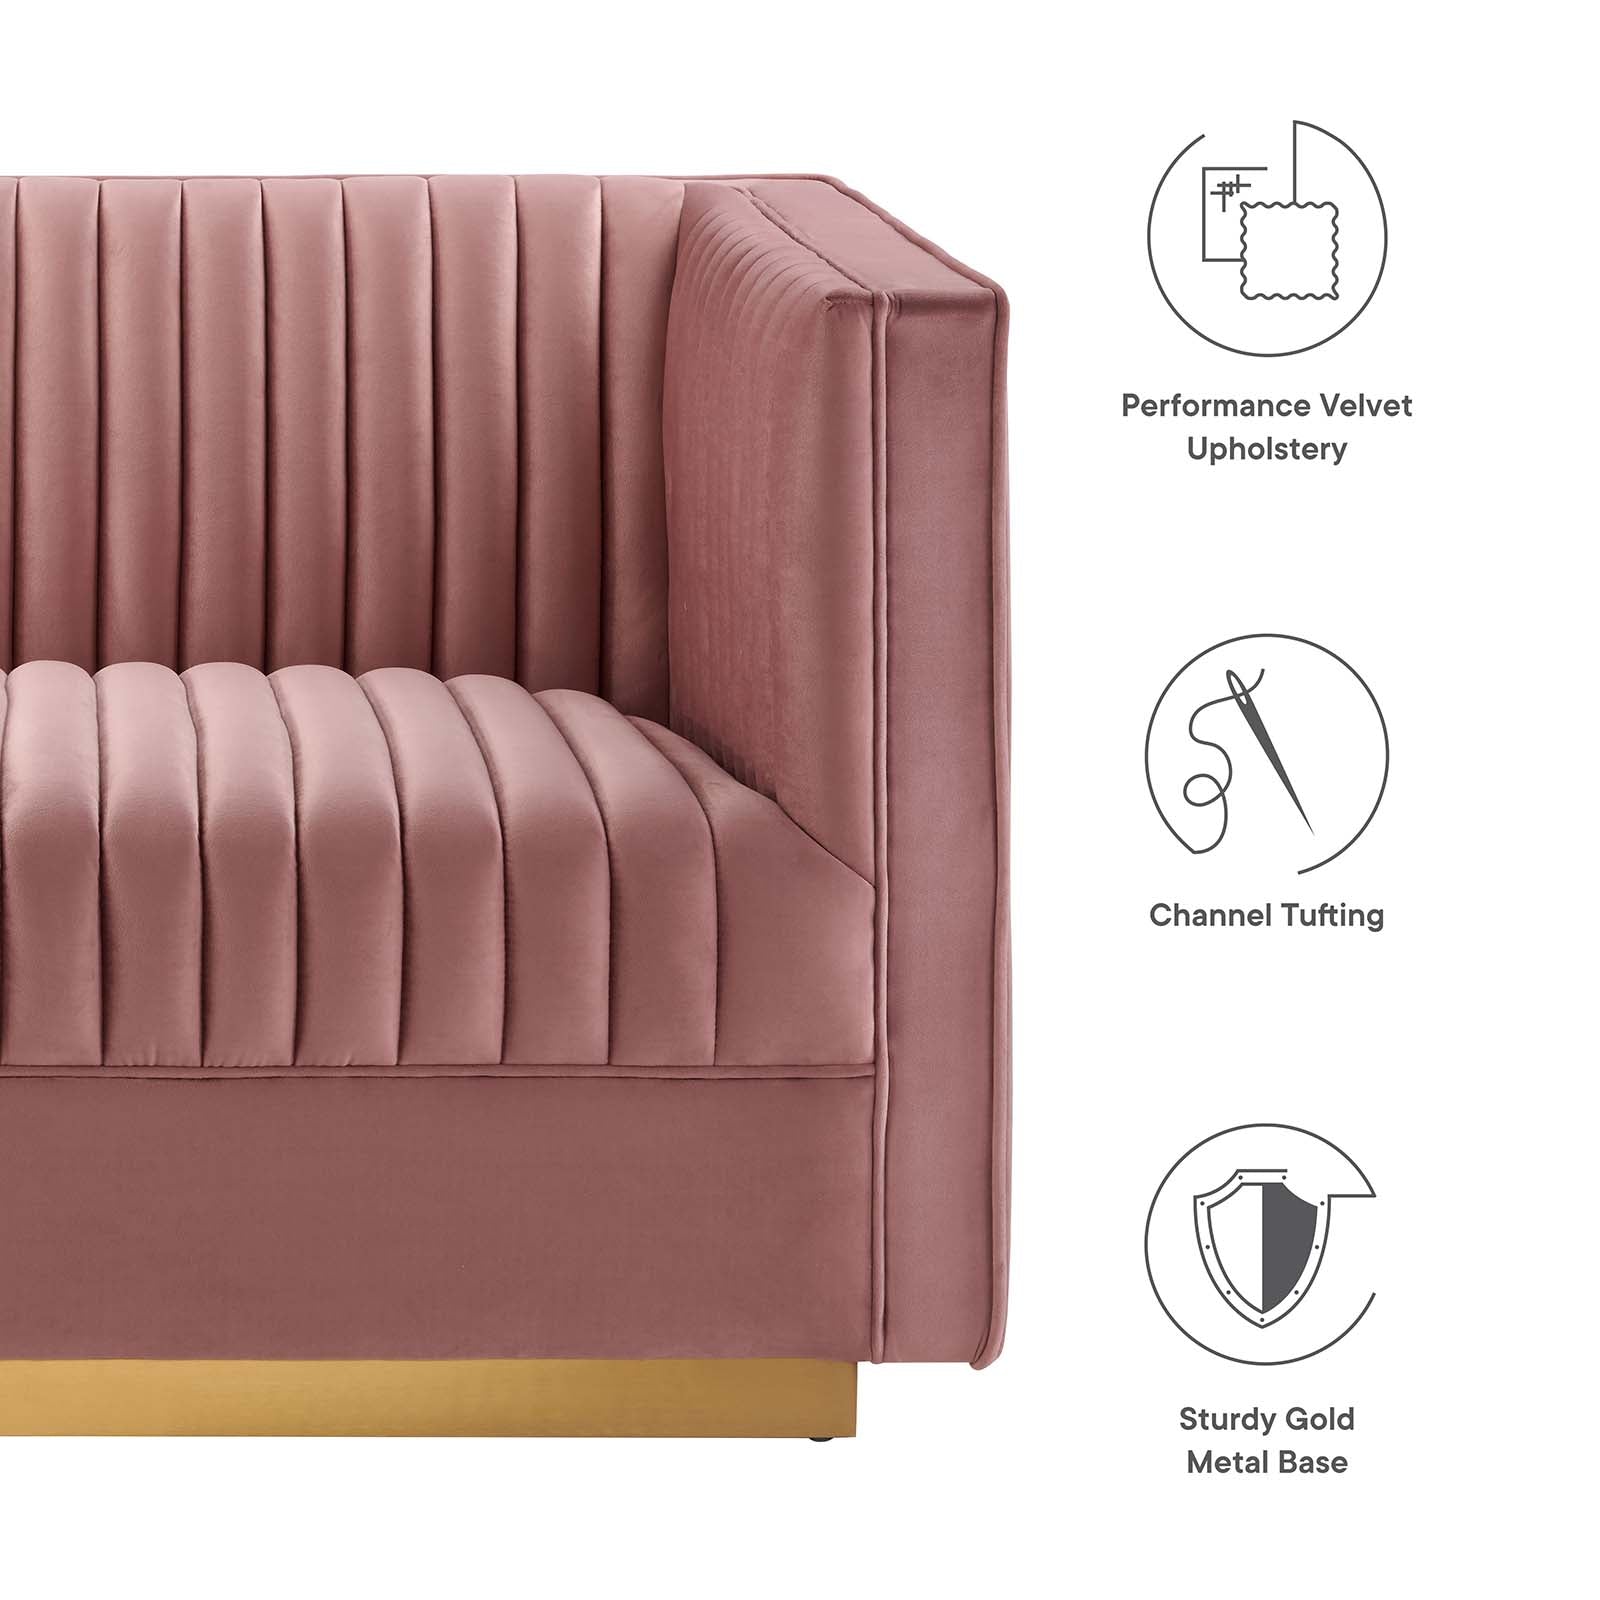 Modway Sectional Sofas - Sanguine Channel Tufted Performance Velvet 7-Piece Left-Facing Modular Sectional Sofa Dusty Rose